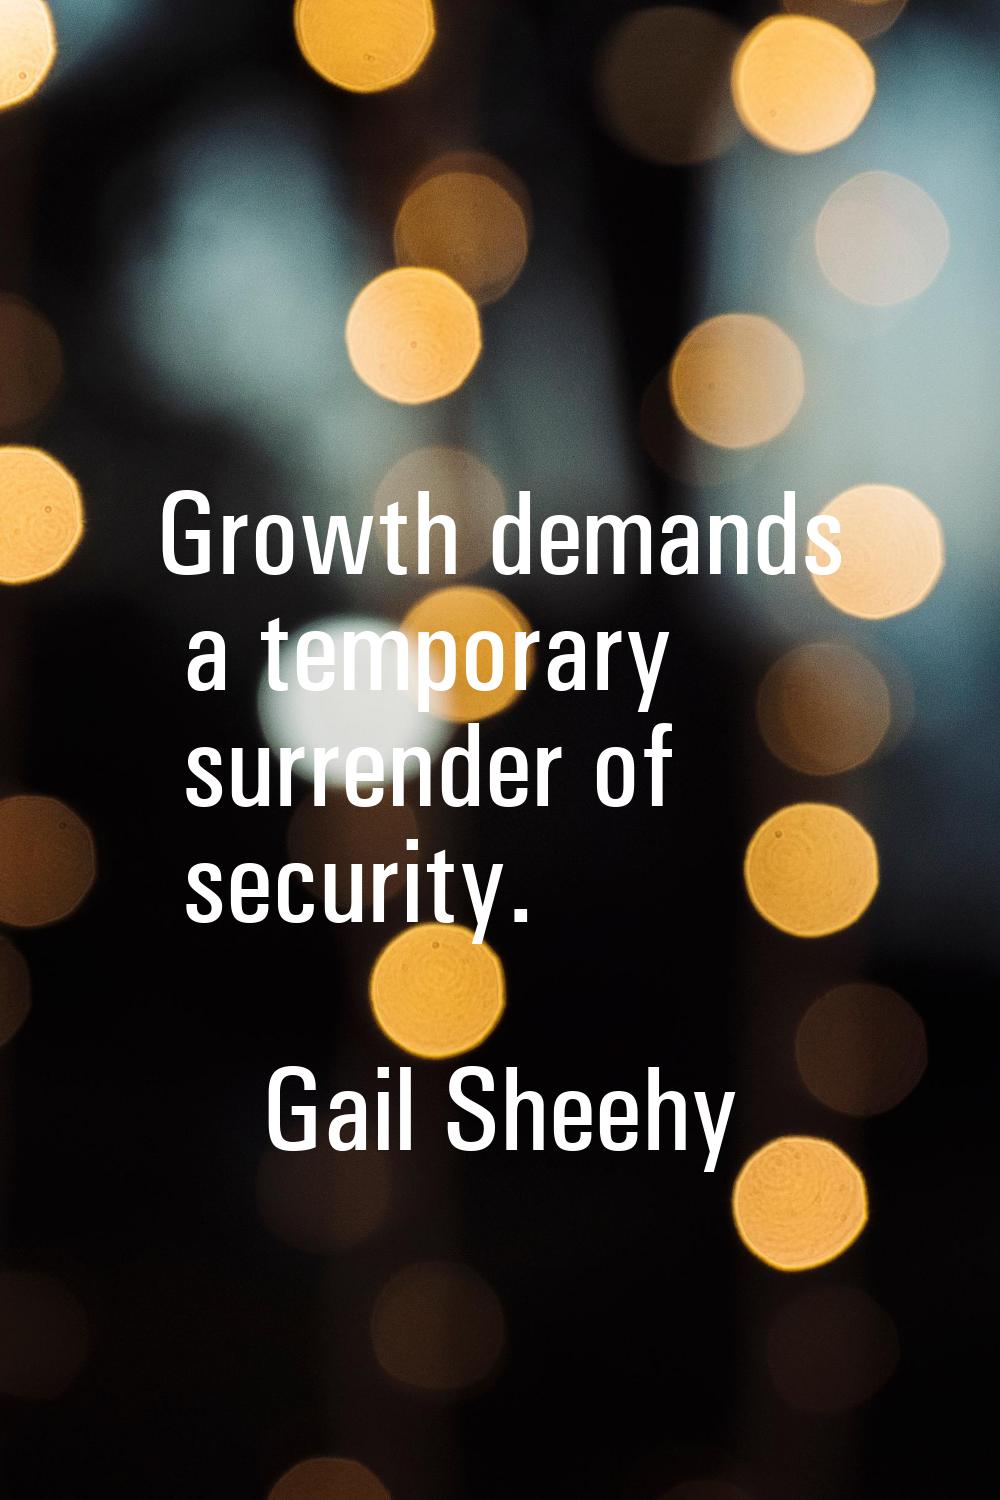 Growth demands a temporary surrender of security.